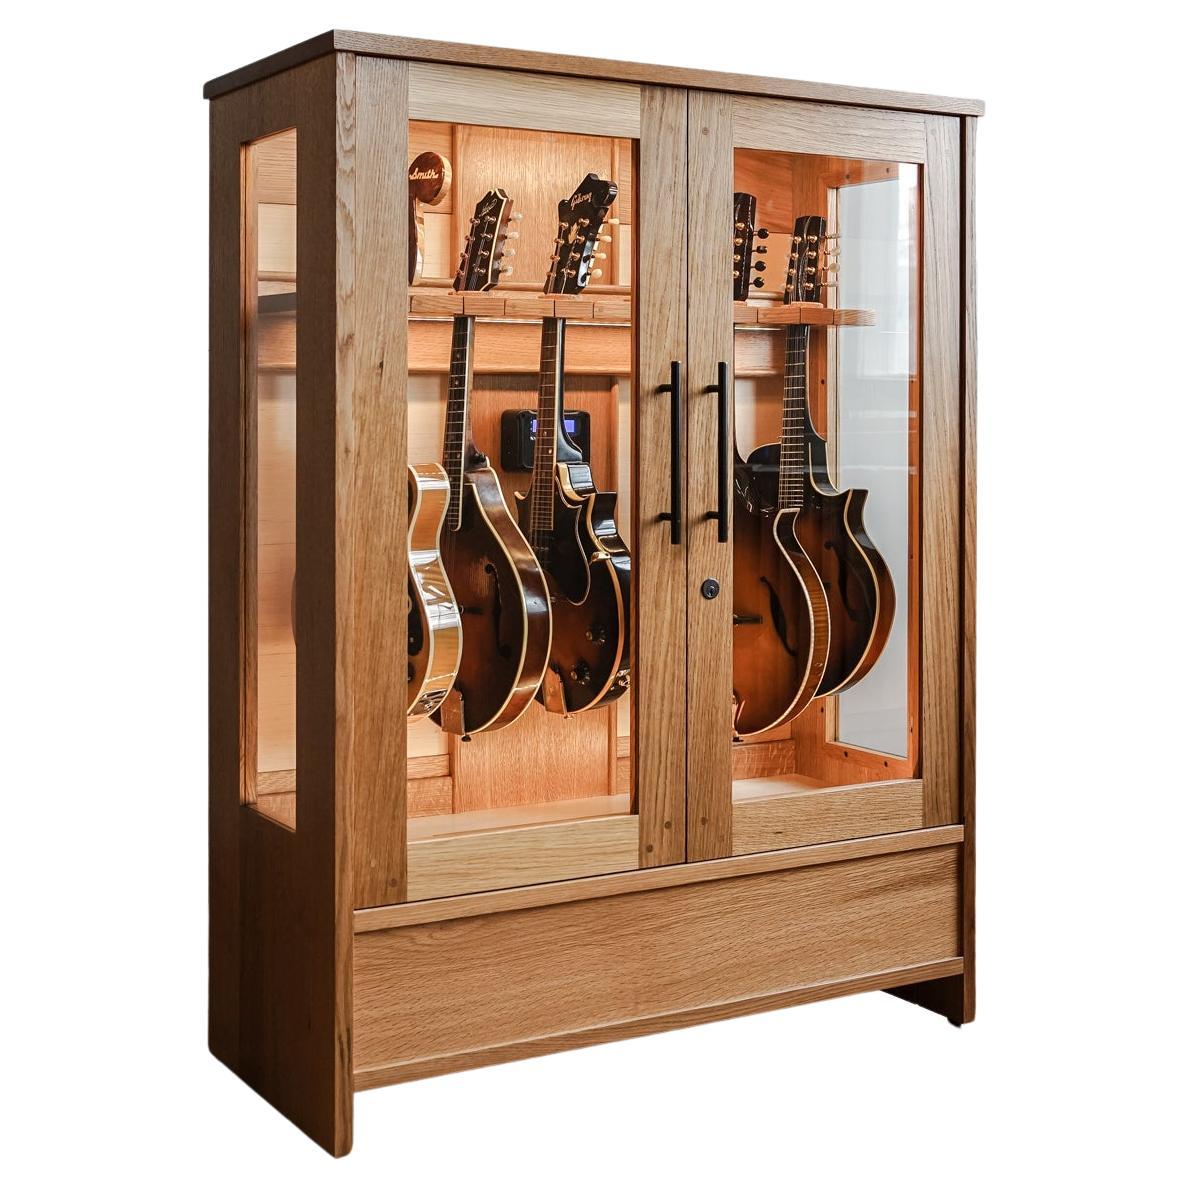 Mandolin & Violin Display Case with Built-In Humidifier